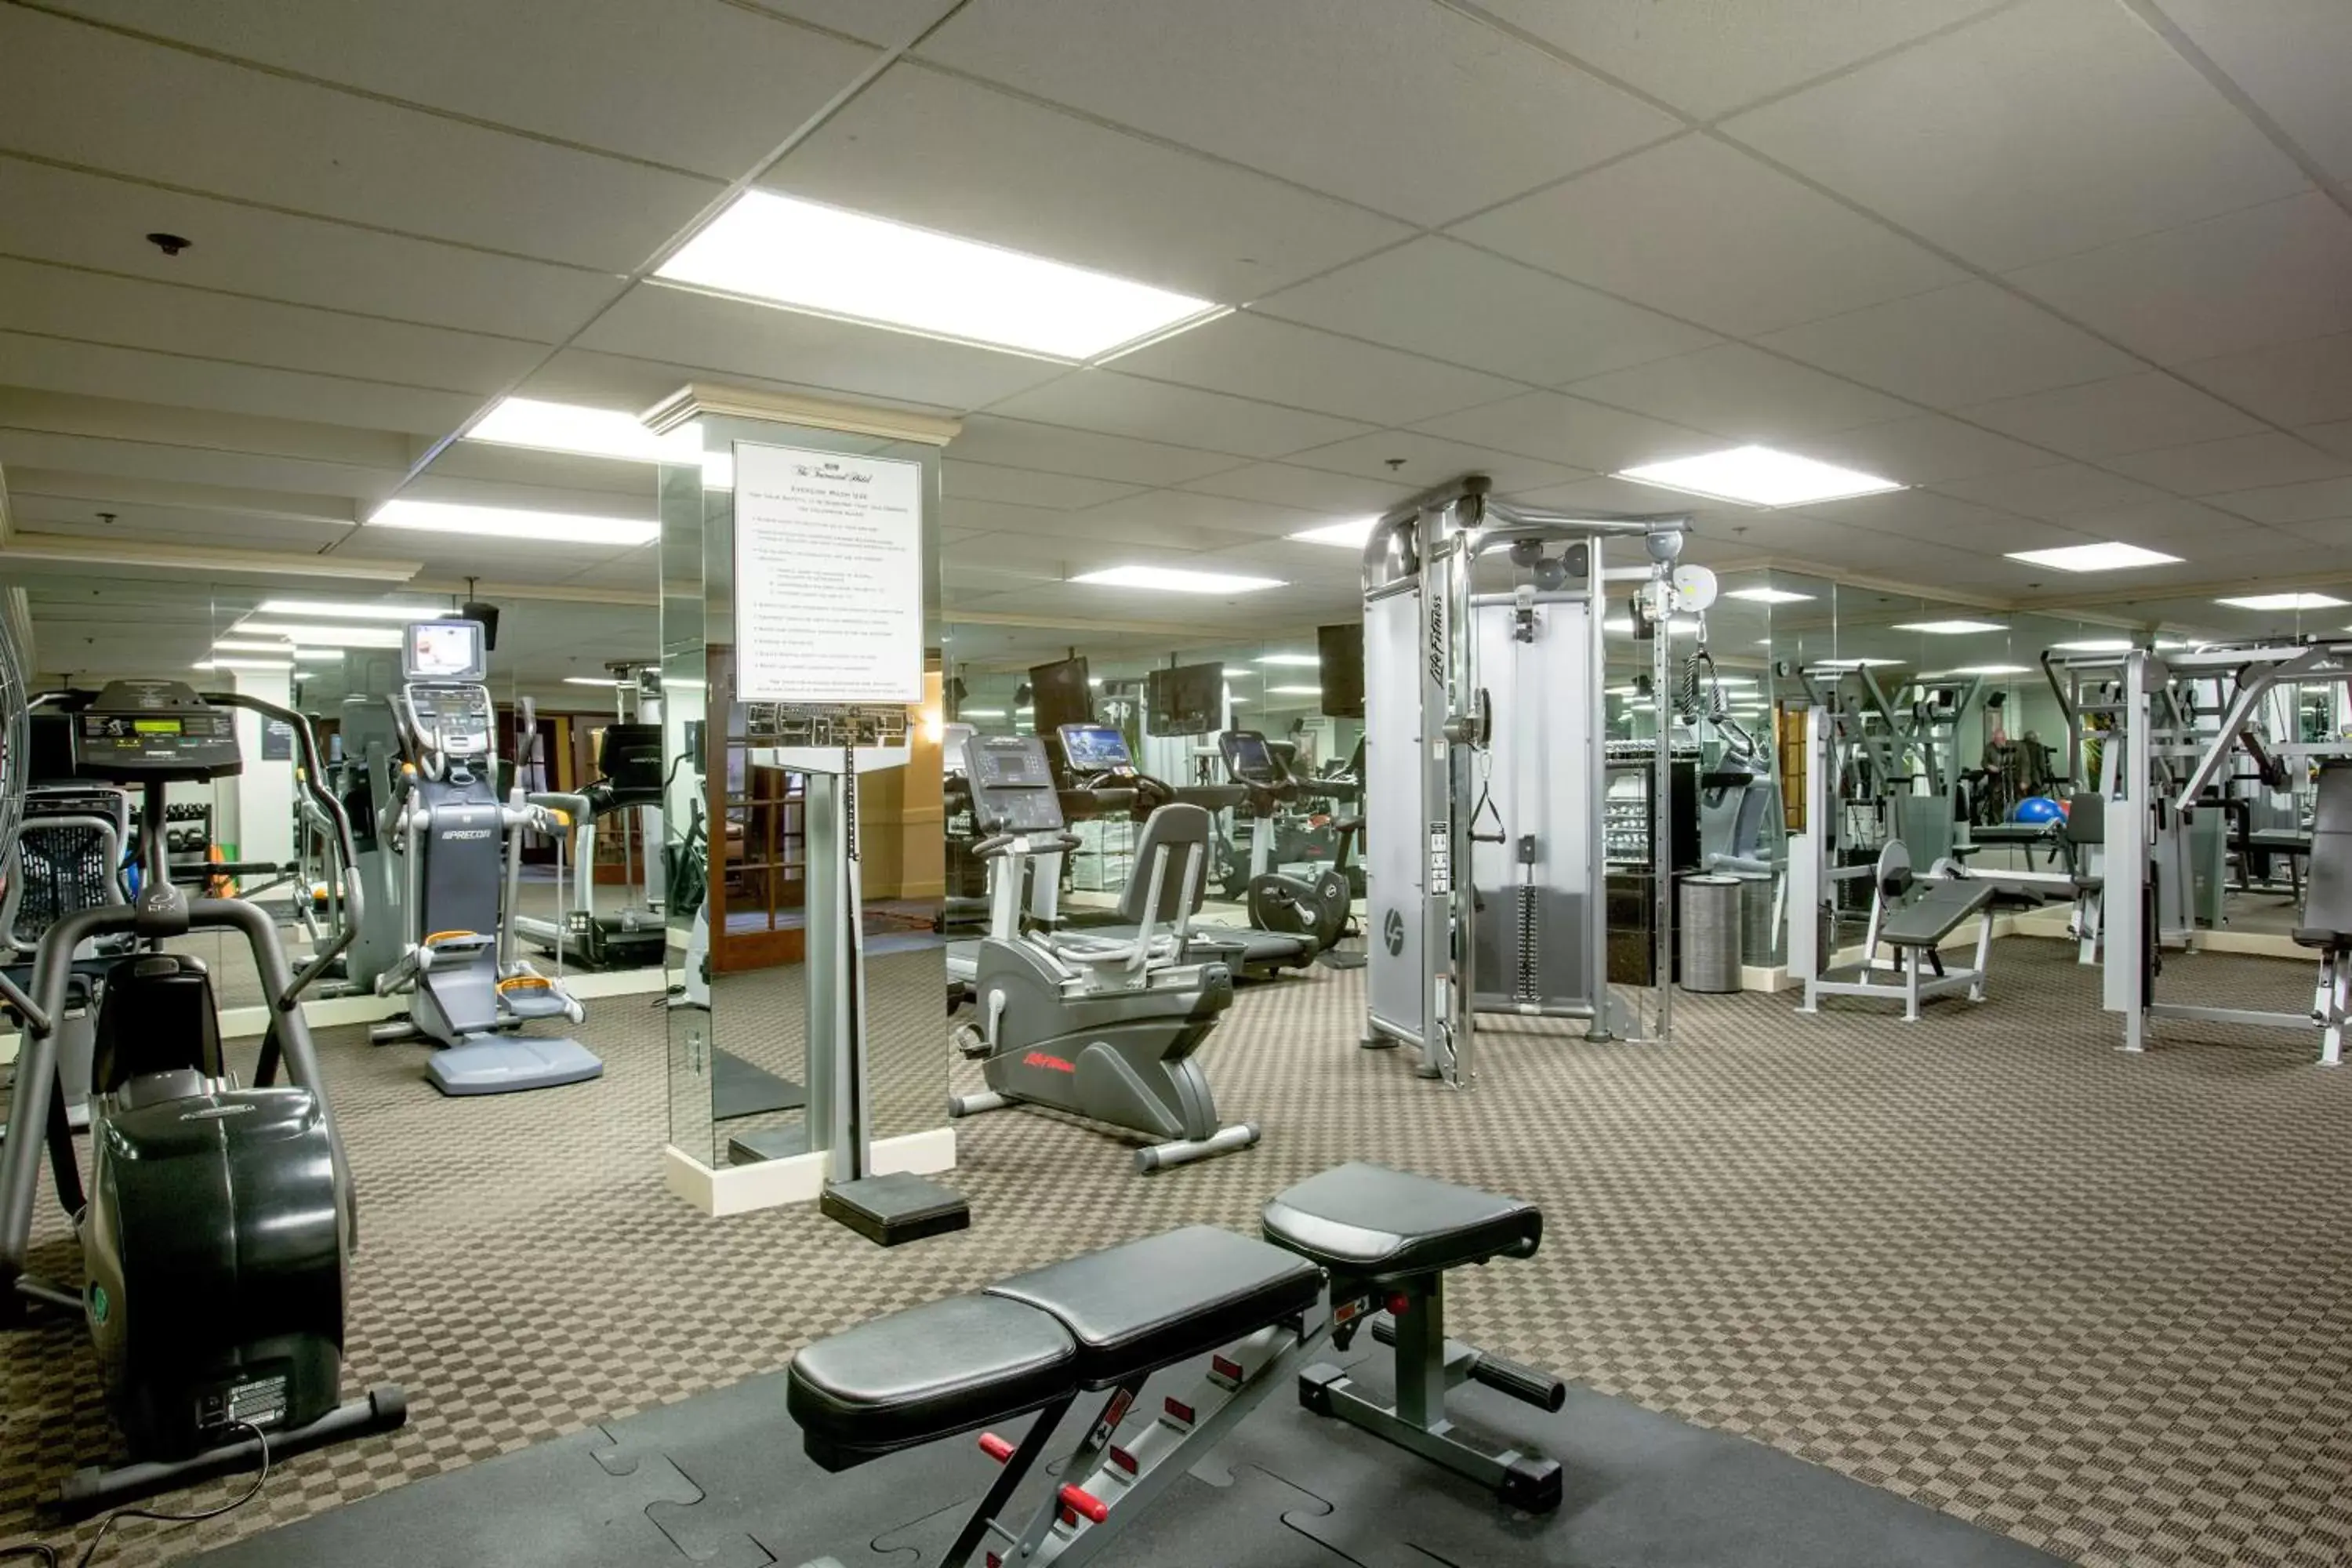 Fitness centre/facilities, Fitness Center/Facilities in The Townsend Hotel